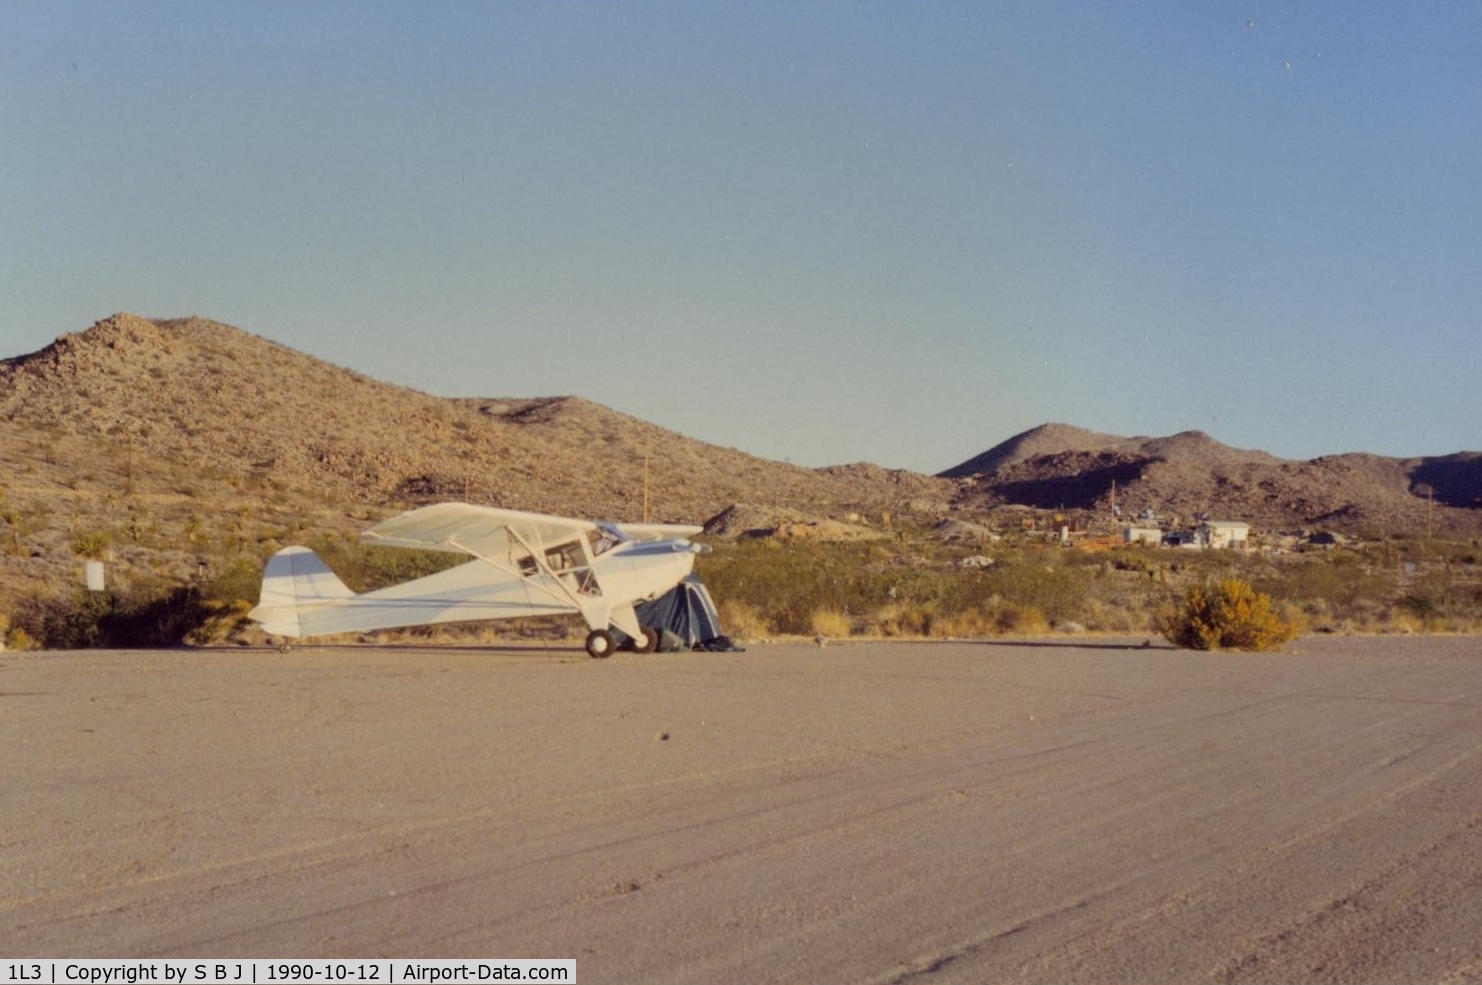 Searchlight Airport (1L3) - N39932 spending the night at Searchlight,Nevada airport).Was not much there in 1990. Lots of opportunity for expansion!! There was some road work for homes and hangars,but nothing more. Northerly view.